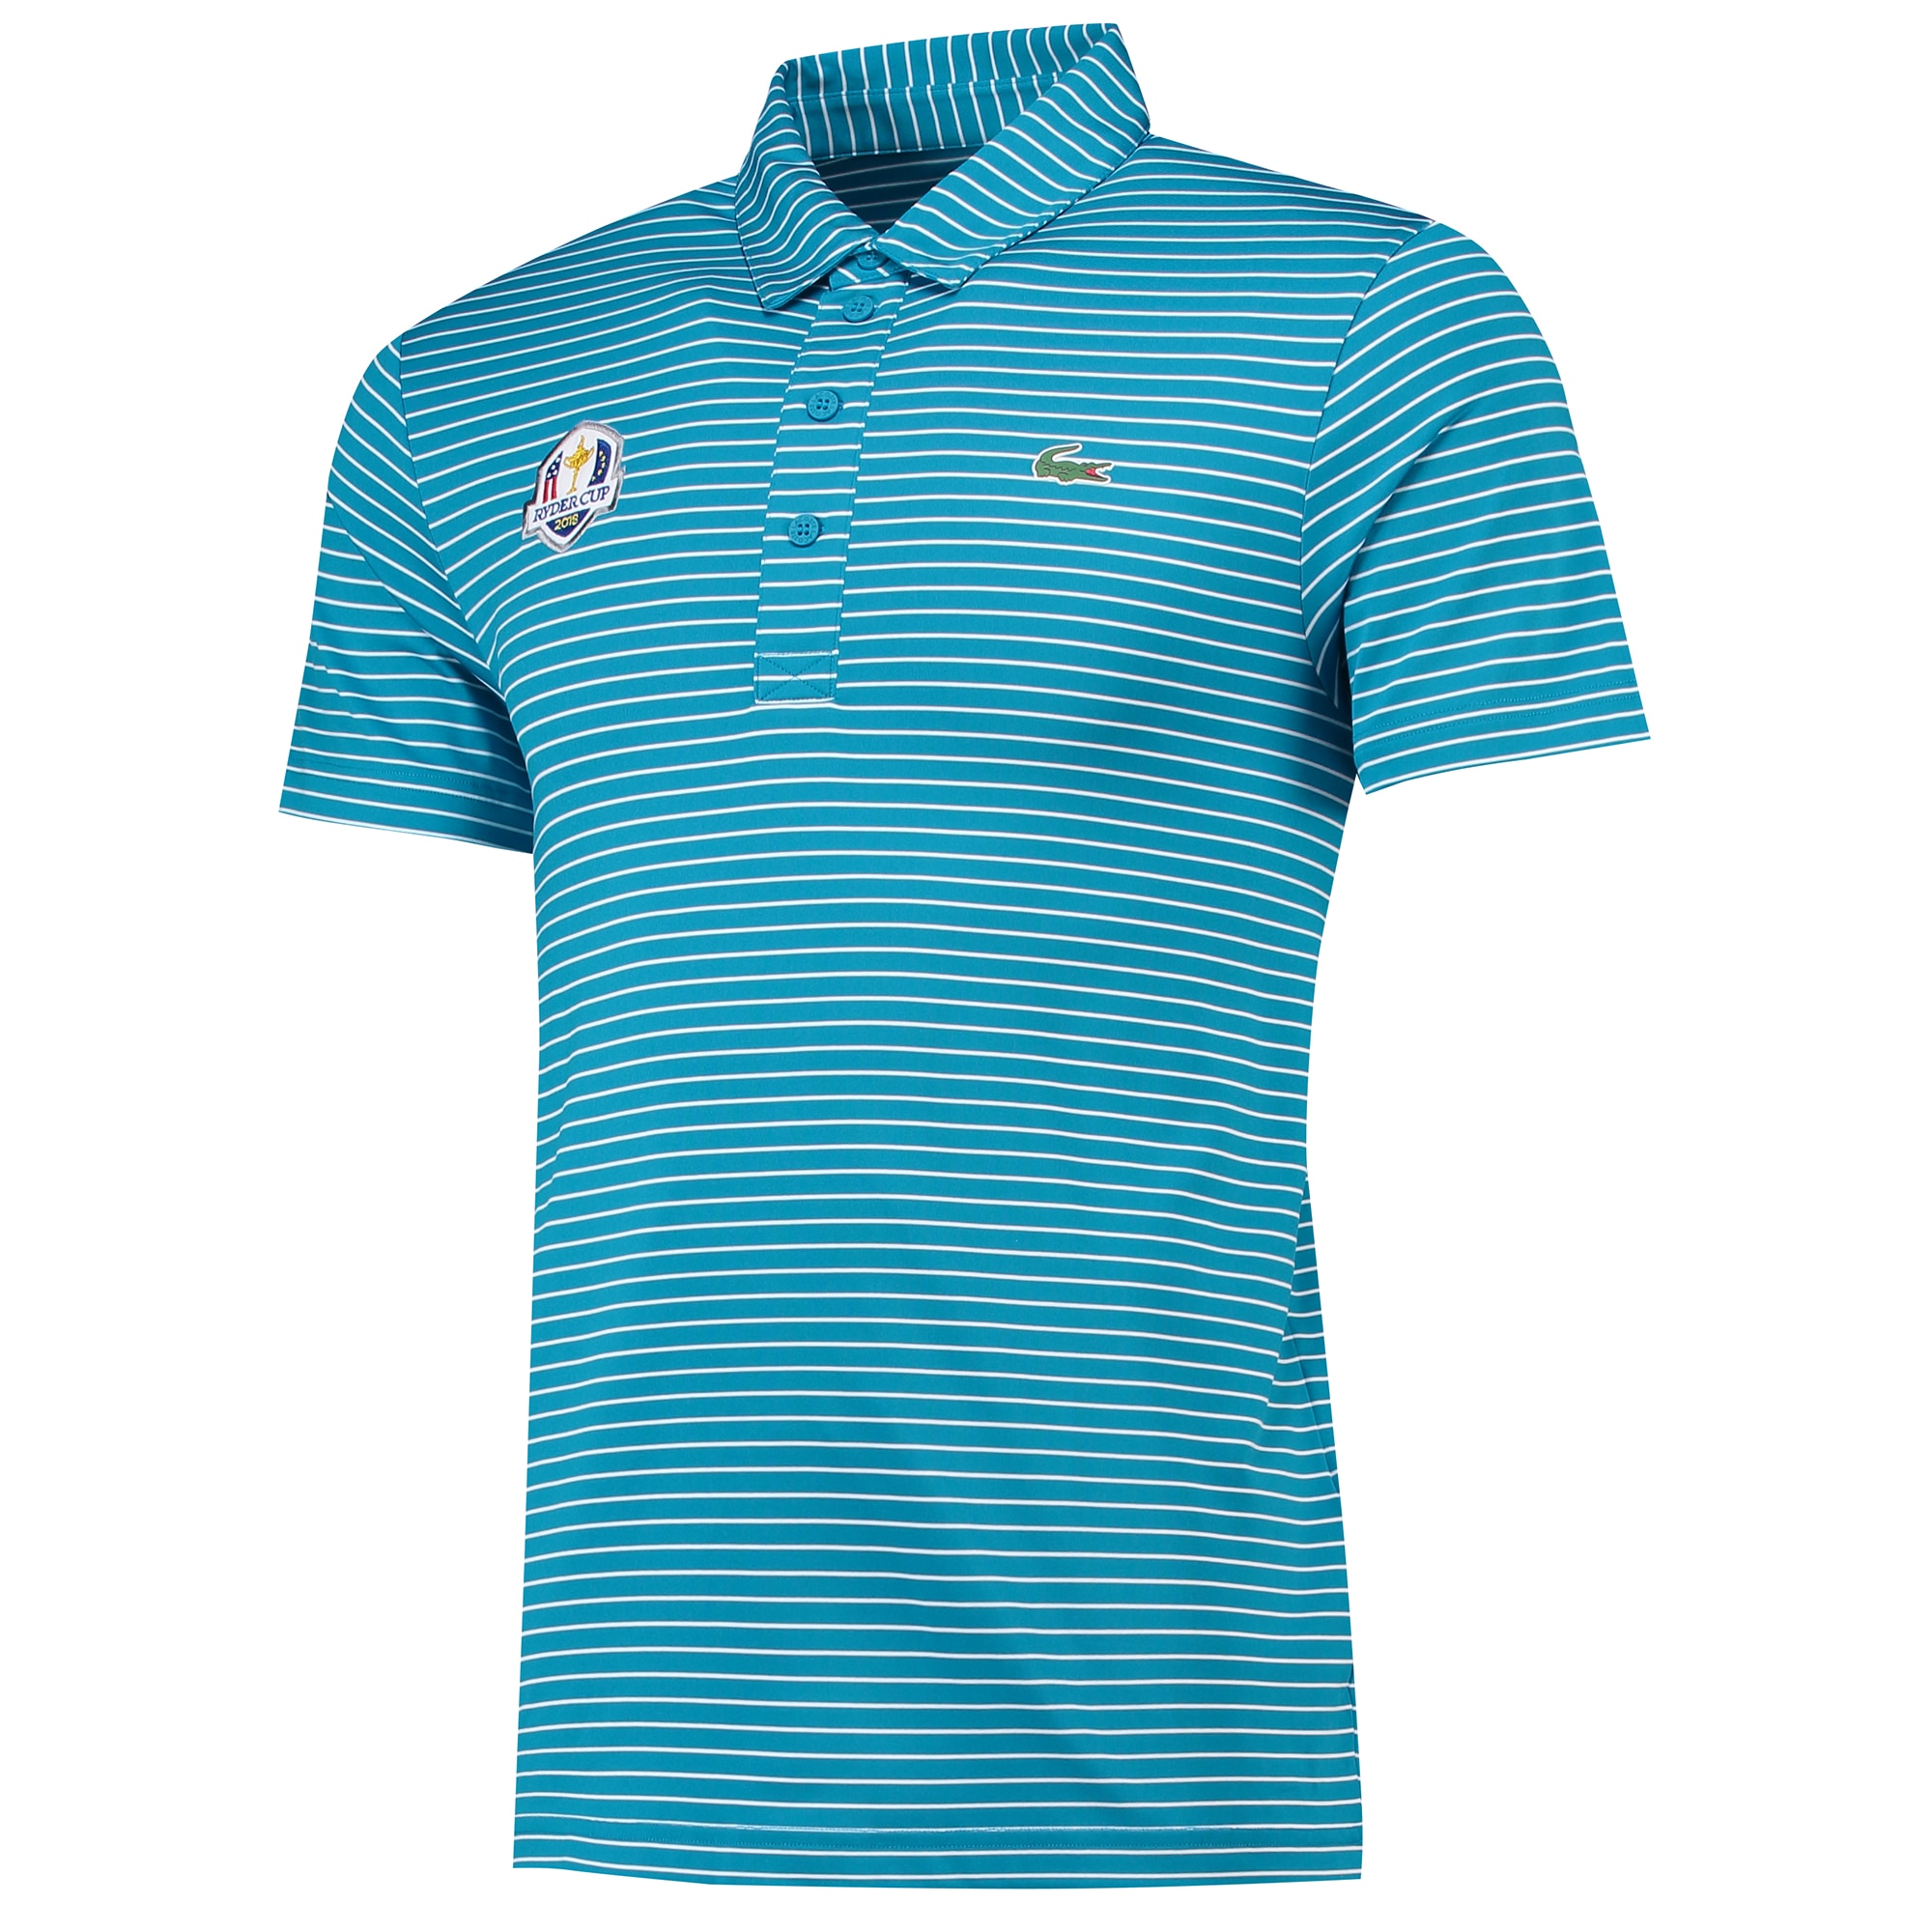 lacoste ryder cup polo